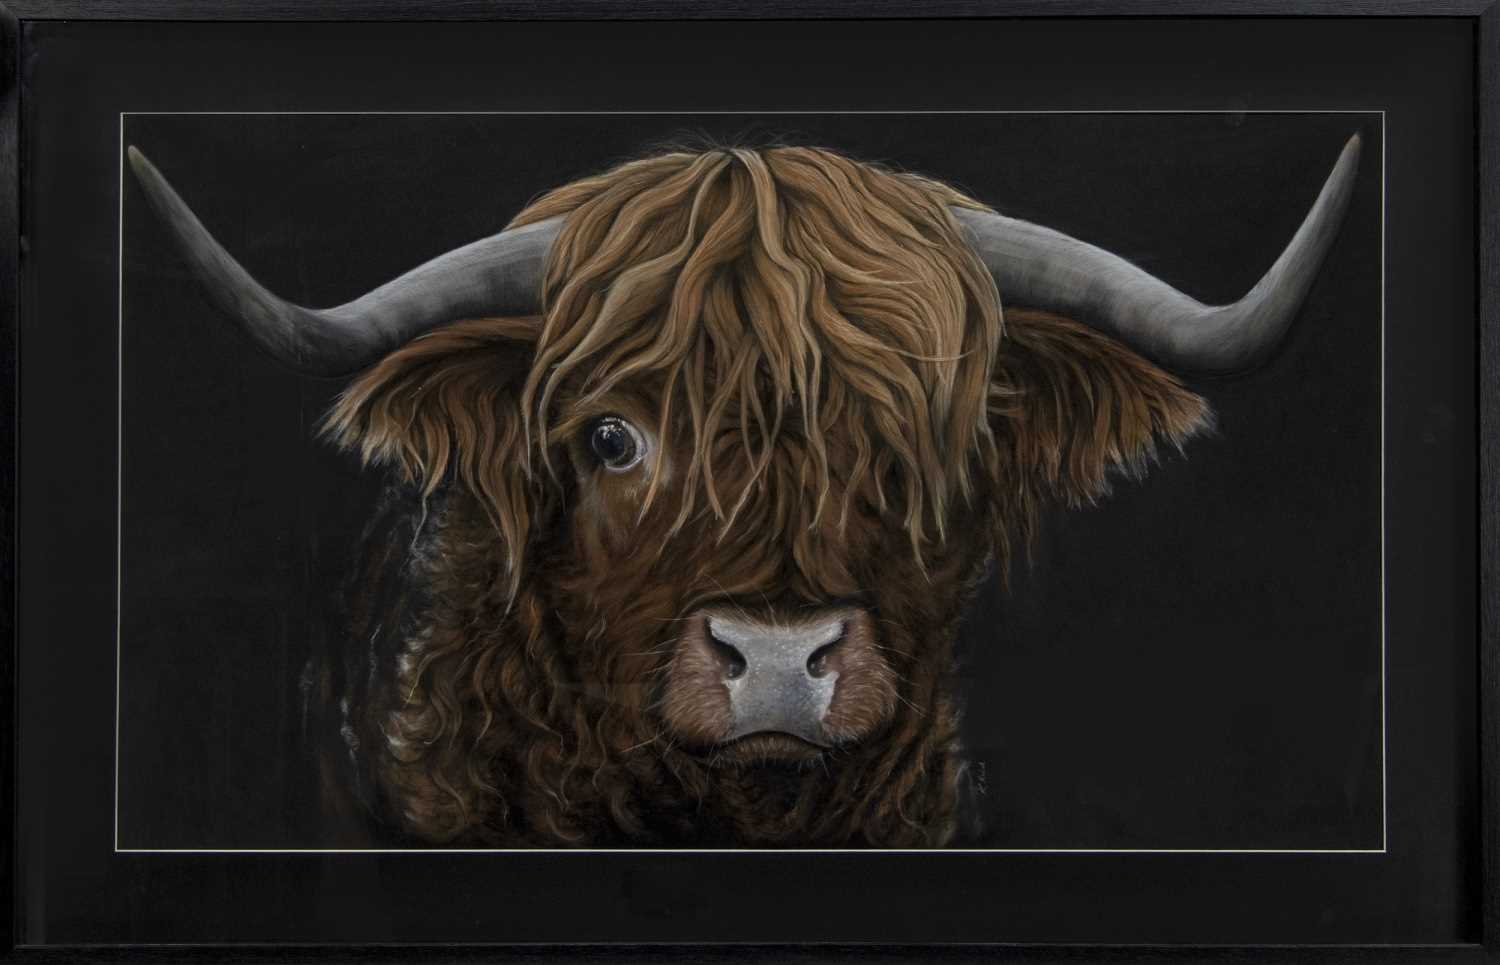 Lot 118 - HIGHLAND COW, A PASTEL BY KAY REID